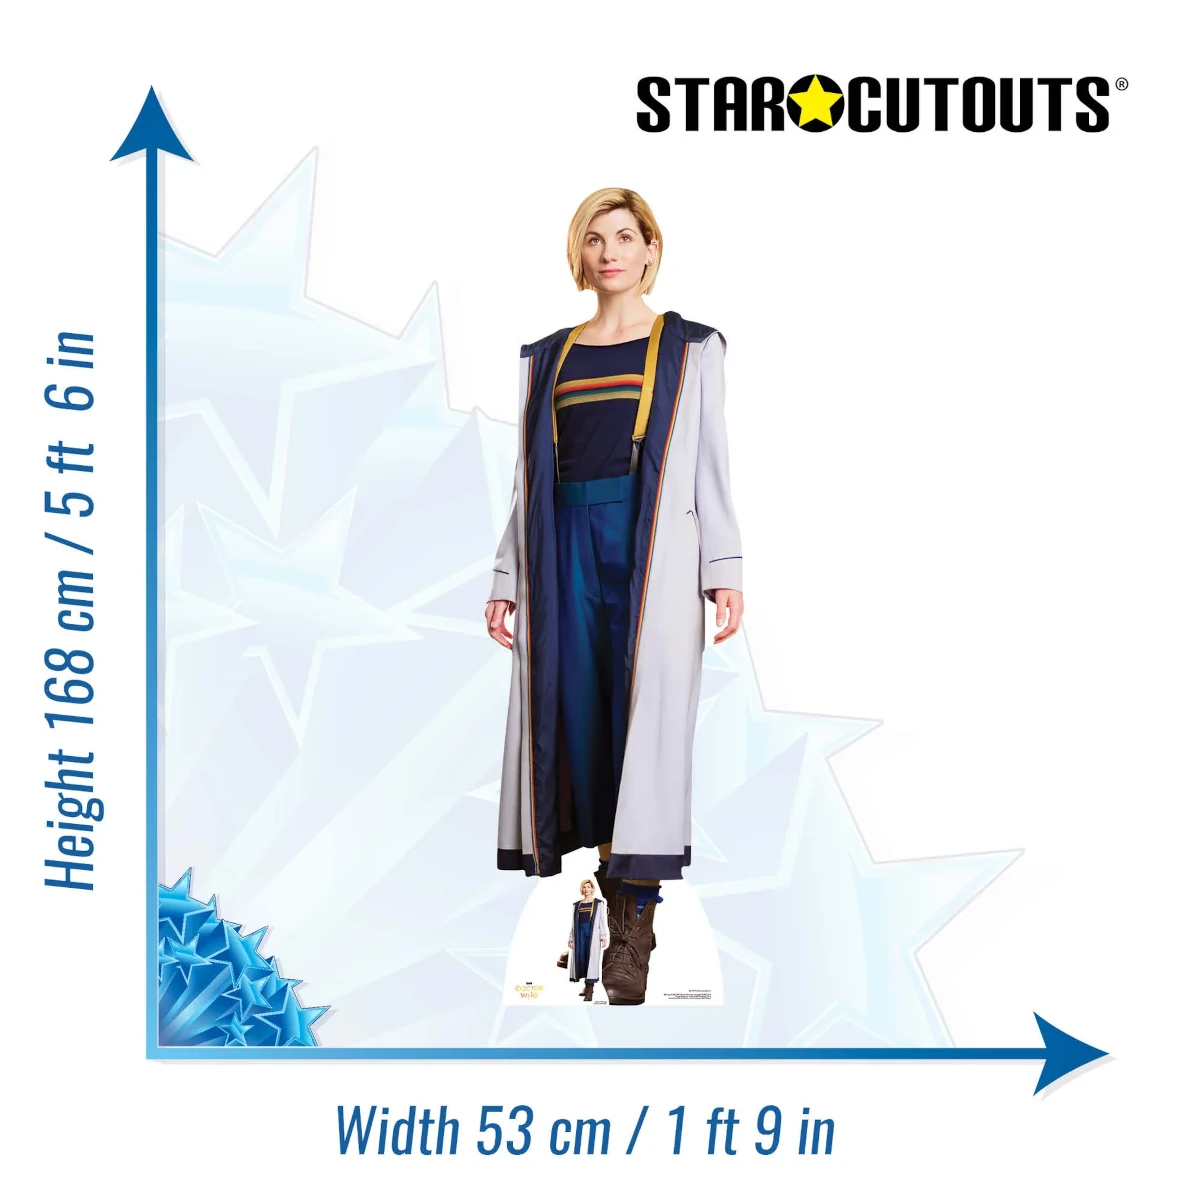 SC1197 Thirteenth Doctor 'Jodie Whittaker' (Doctor Who) Official Lifesize + Mini Cardboard Cutout Standee Size